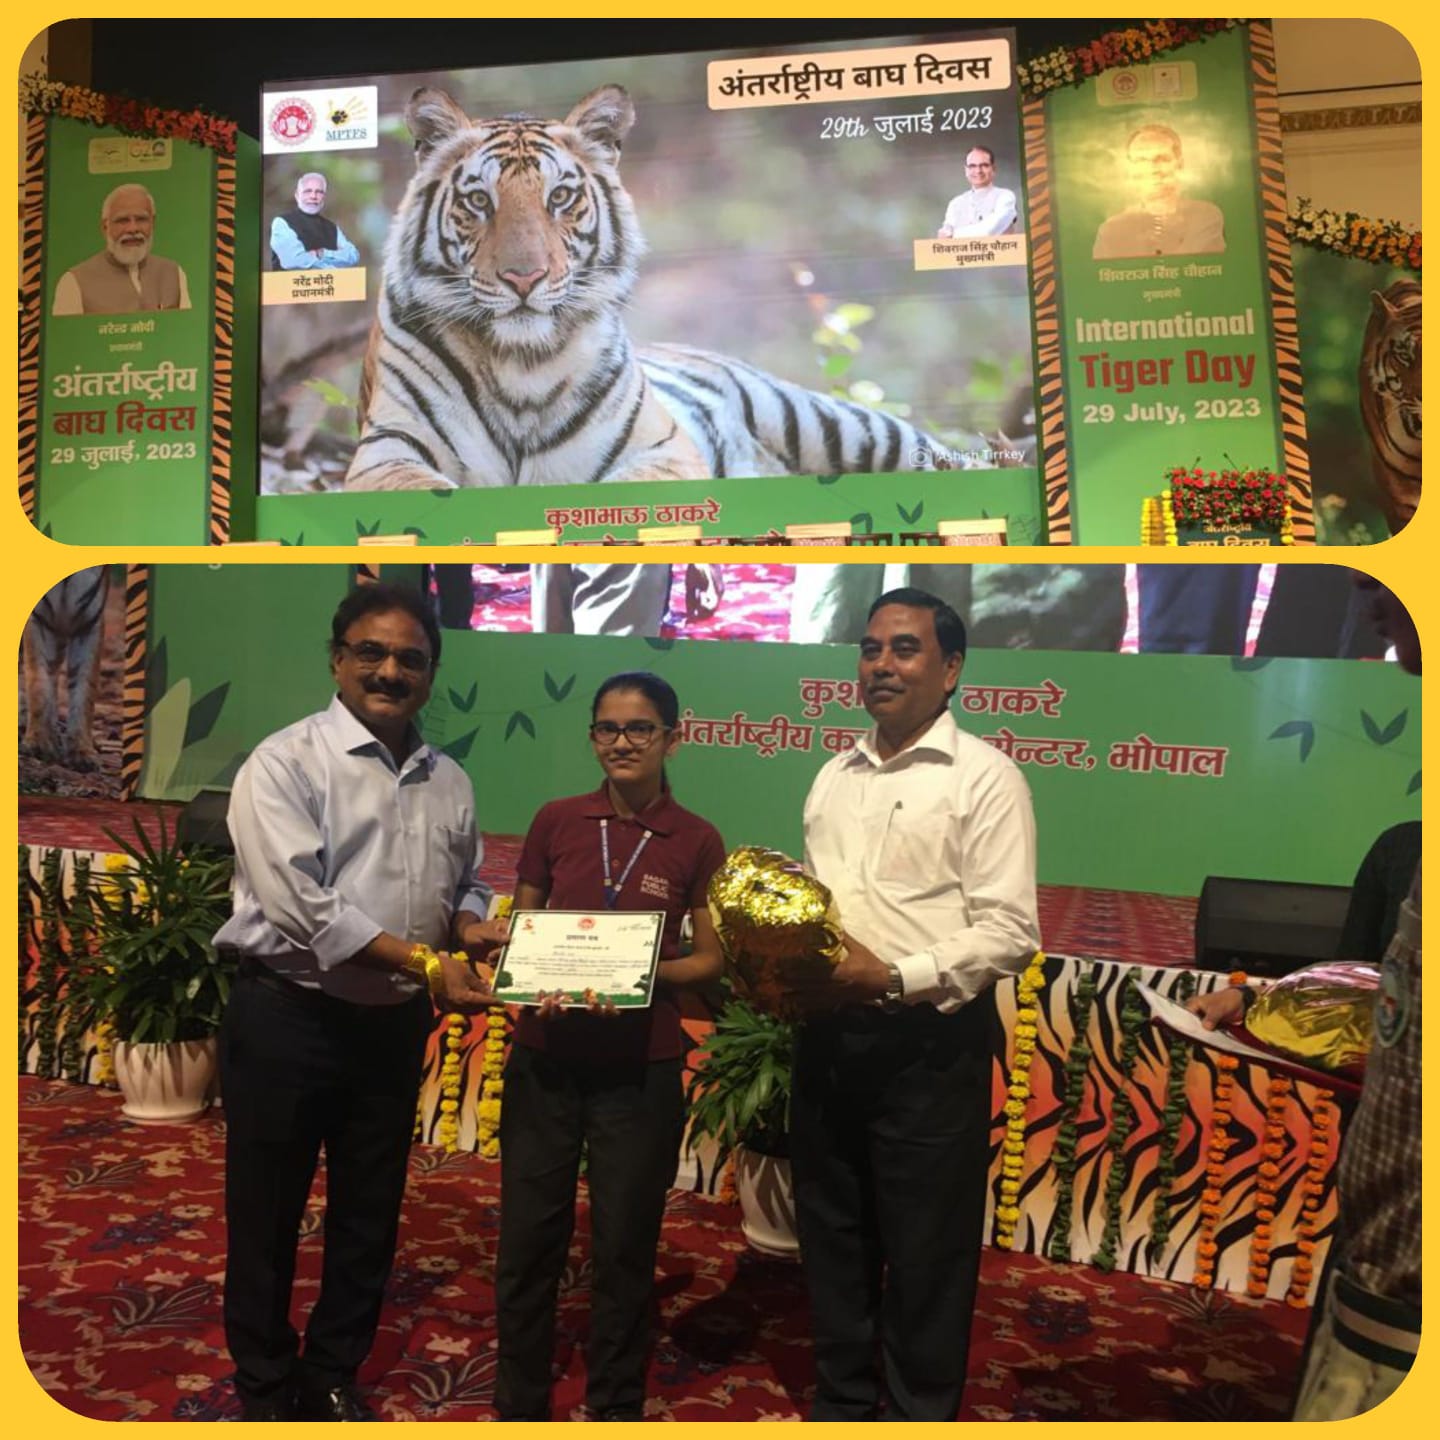 Vaishnavi Rai of VIII-A won III prize in Painting competition organized by Van-Vihar National on the occasion of the International Tiger Day